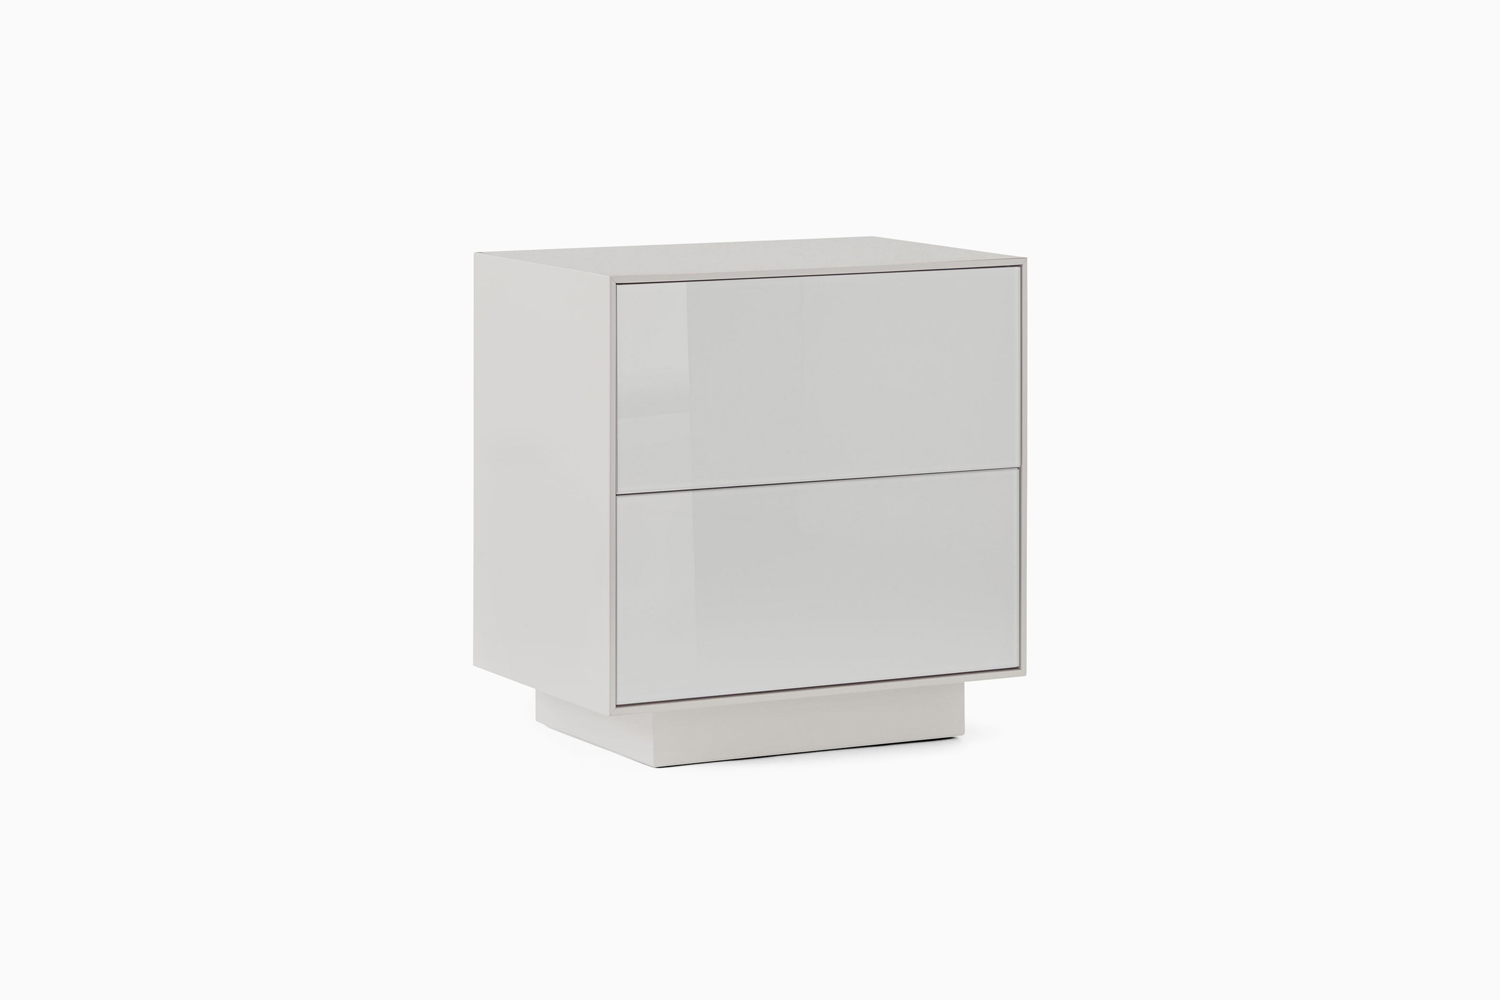 the emilia nightstand is \$549 at west elm. 20